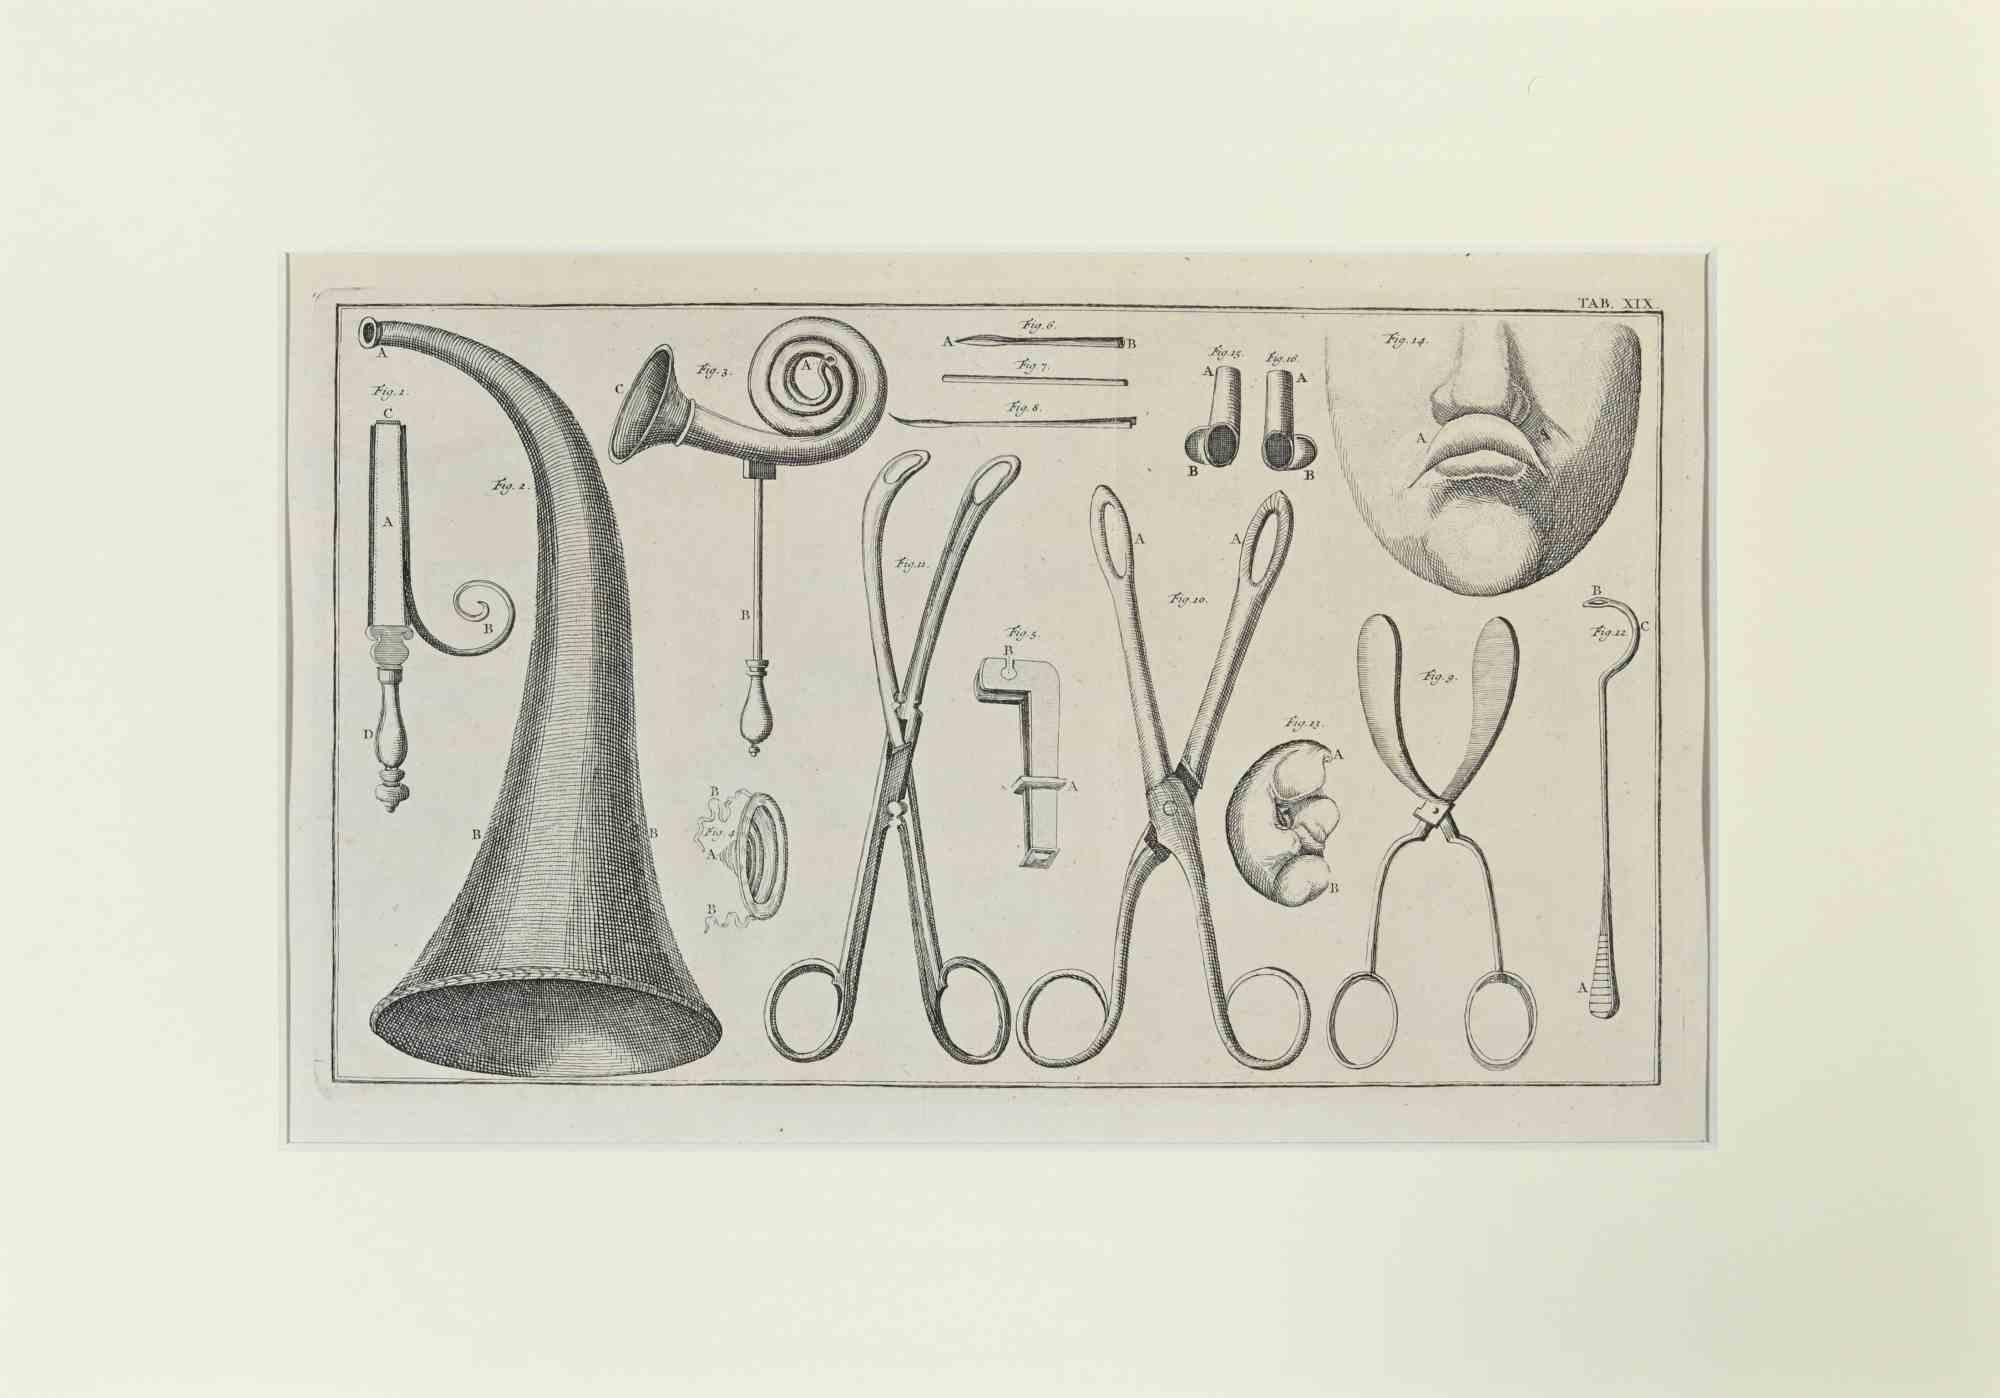 Surgical Treatements is part of the suite realized by Lorenz Heister in the series of Institutiones Chirurgicae, Amsterdam, Janssonius-Waesberg, 1750.

Etching on paper.

The work belongs to the Latin edition of the famous work by the founder of